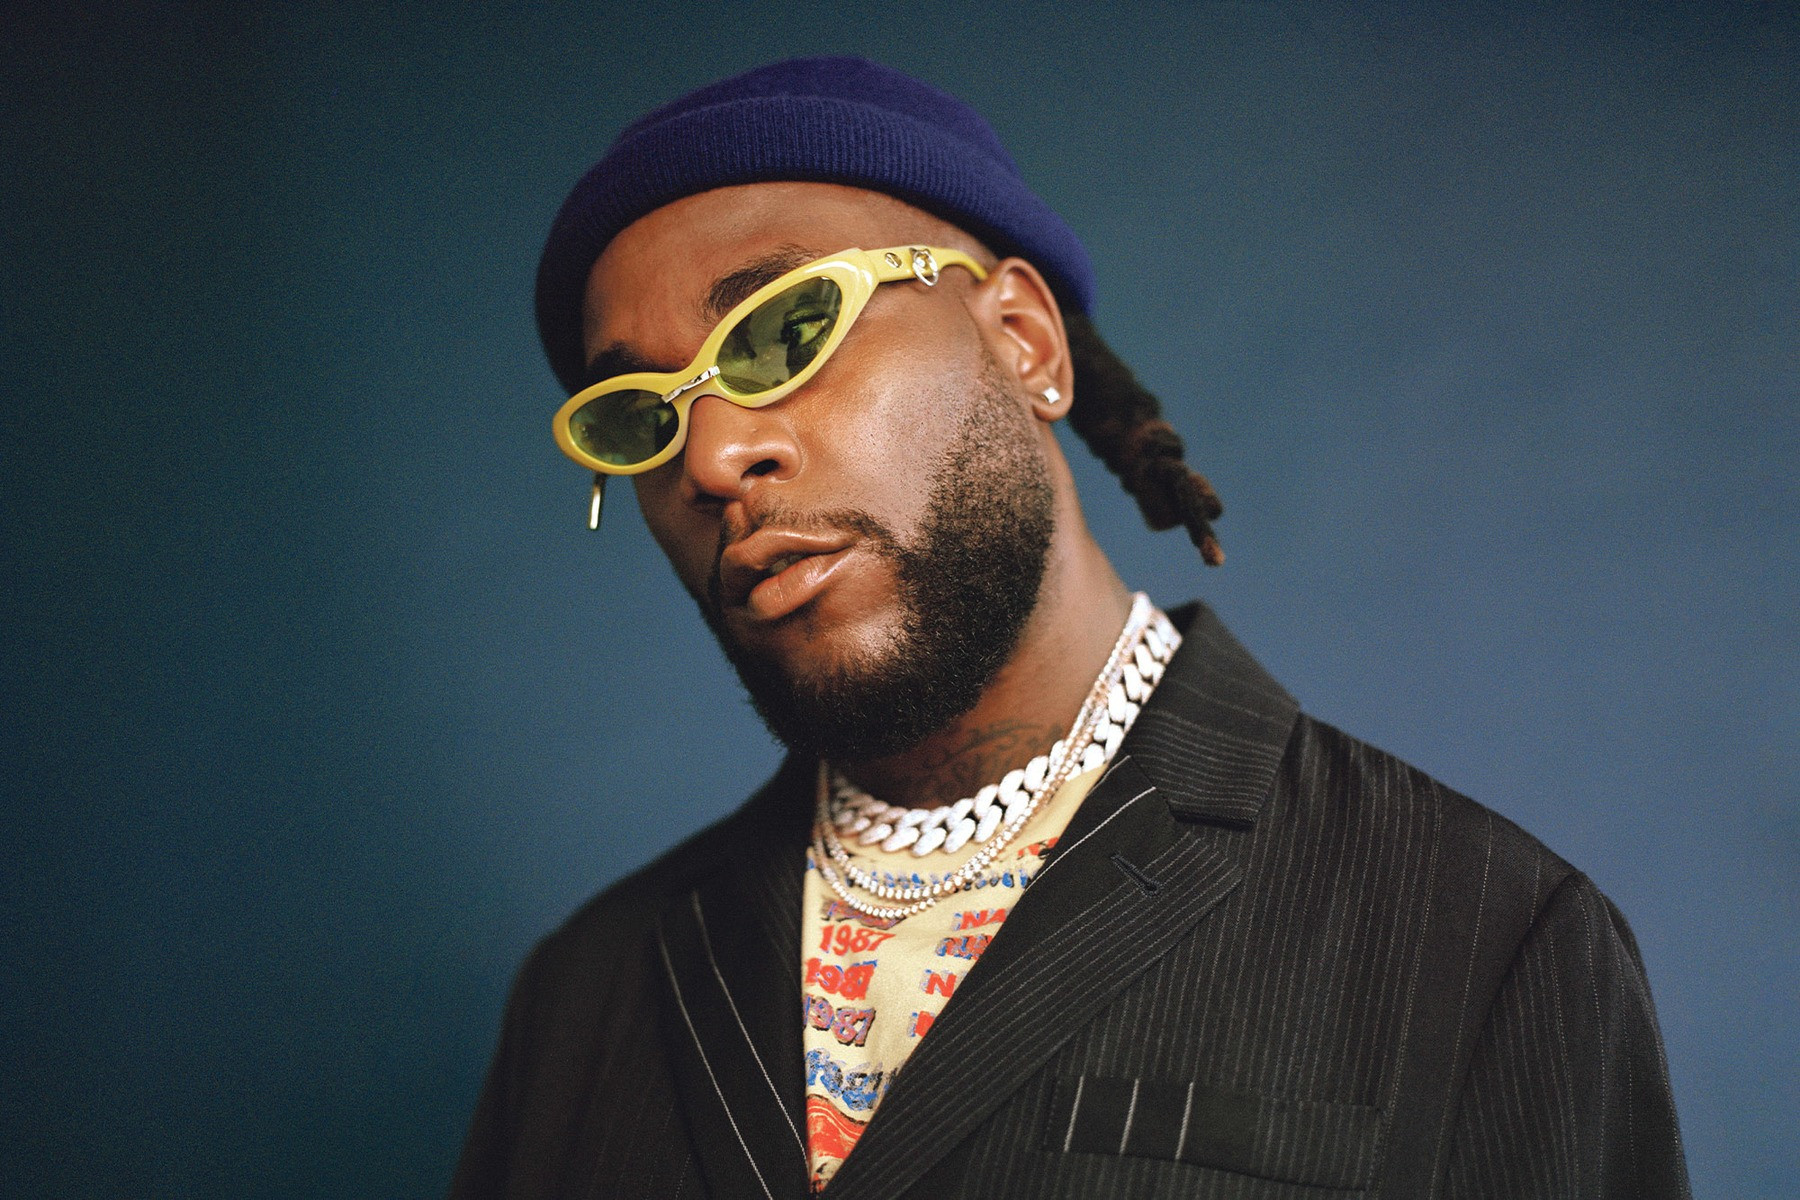 I’m the highest paid artist in the history of African music - Burna Boy. 56